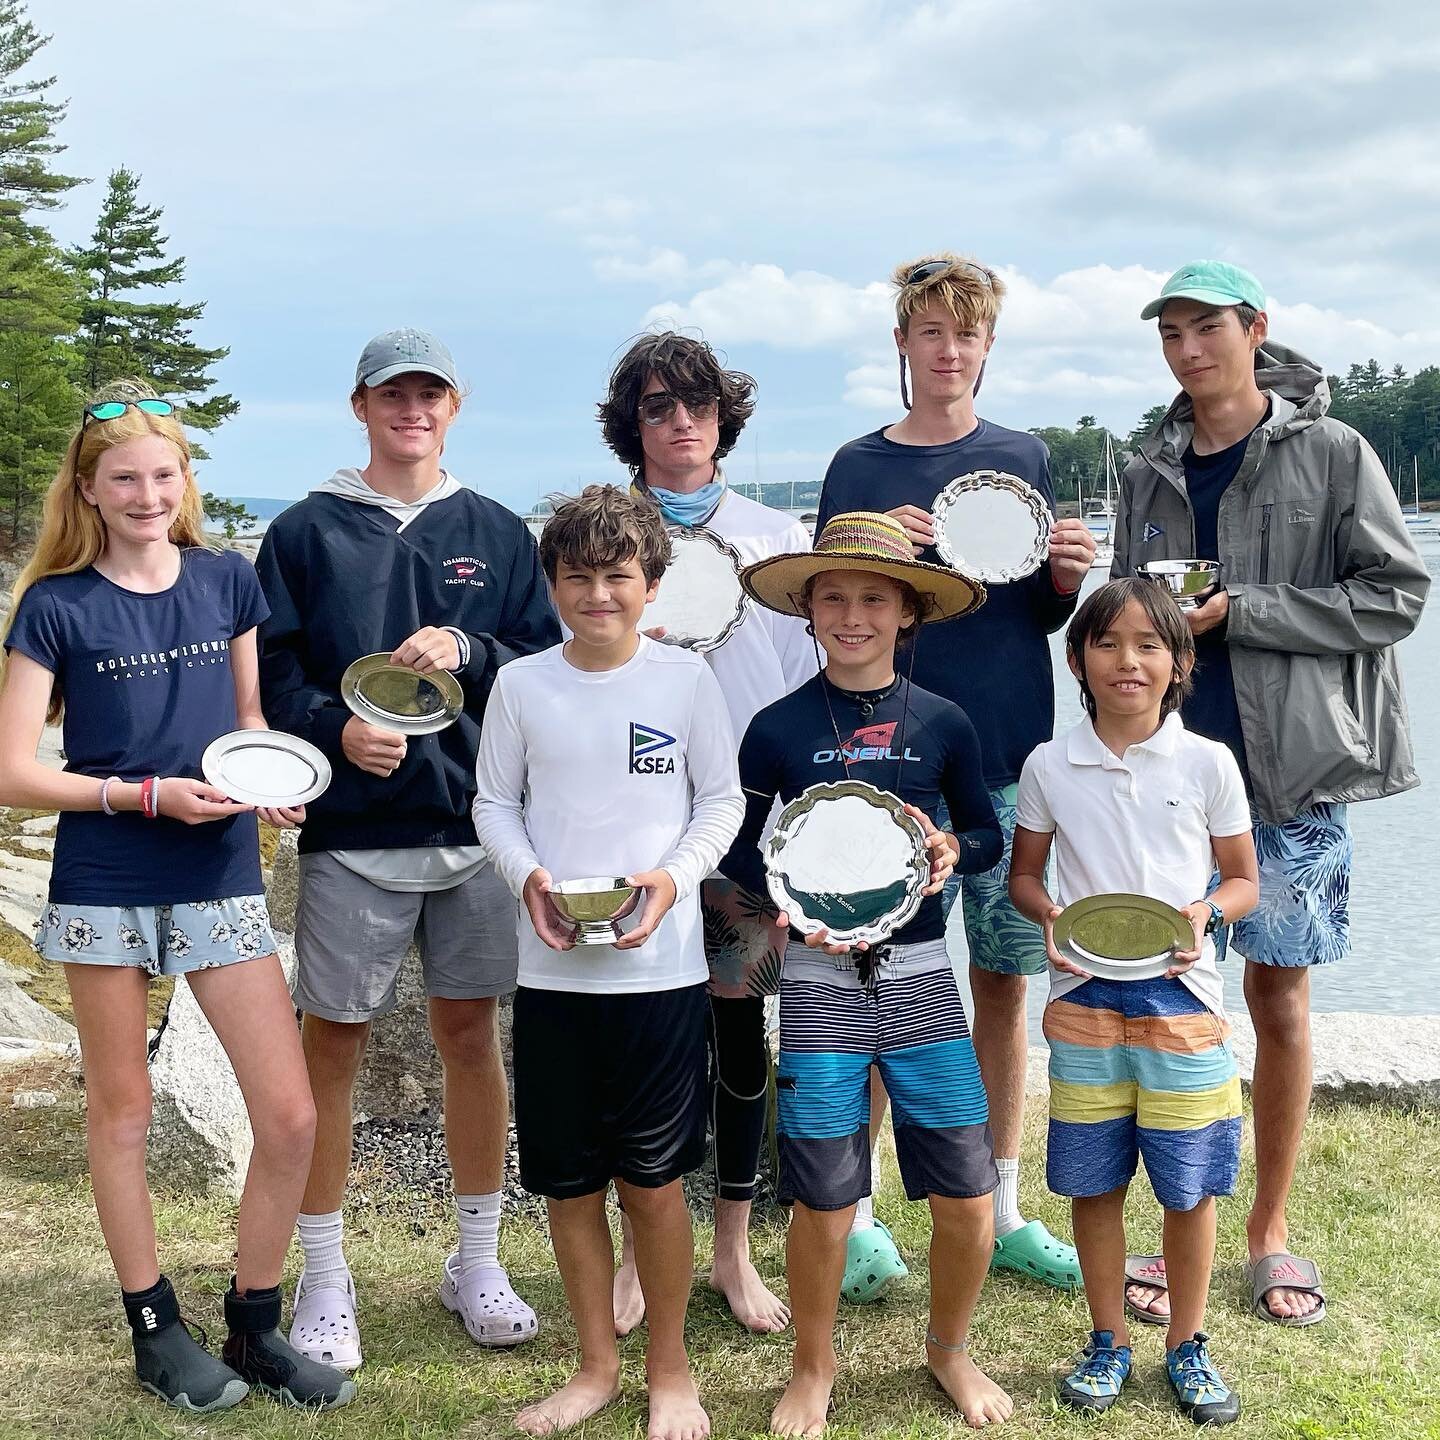 Summer Series 2022 in the bank! Congrats to all our racers for a summer of go-fast sailing. #summer2022⛵️ #kidswhosail